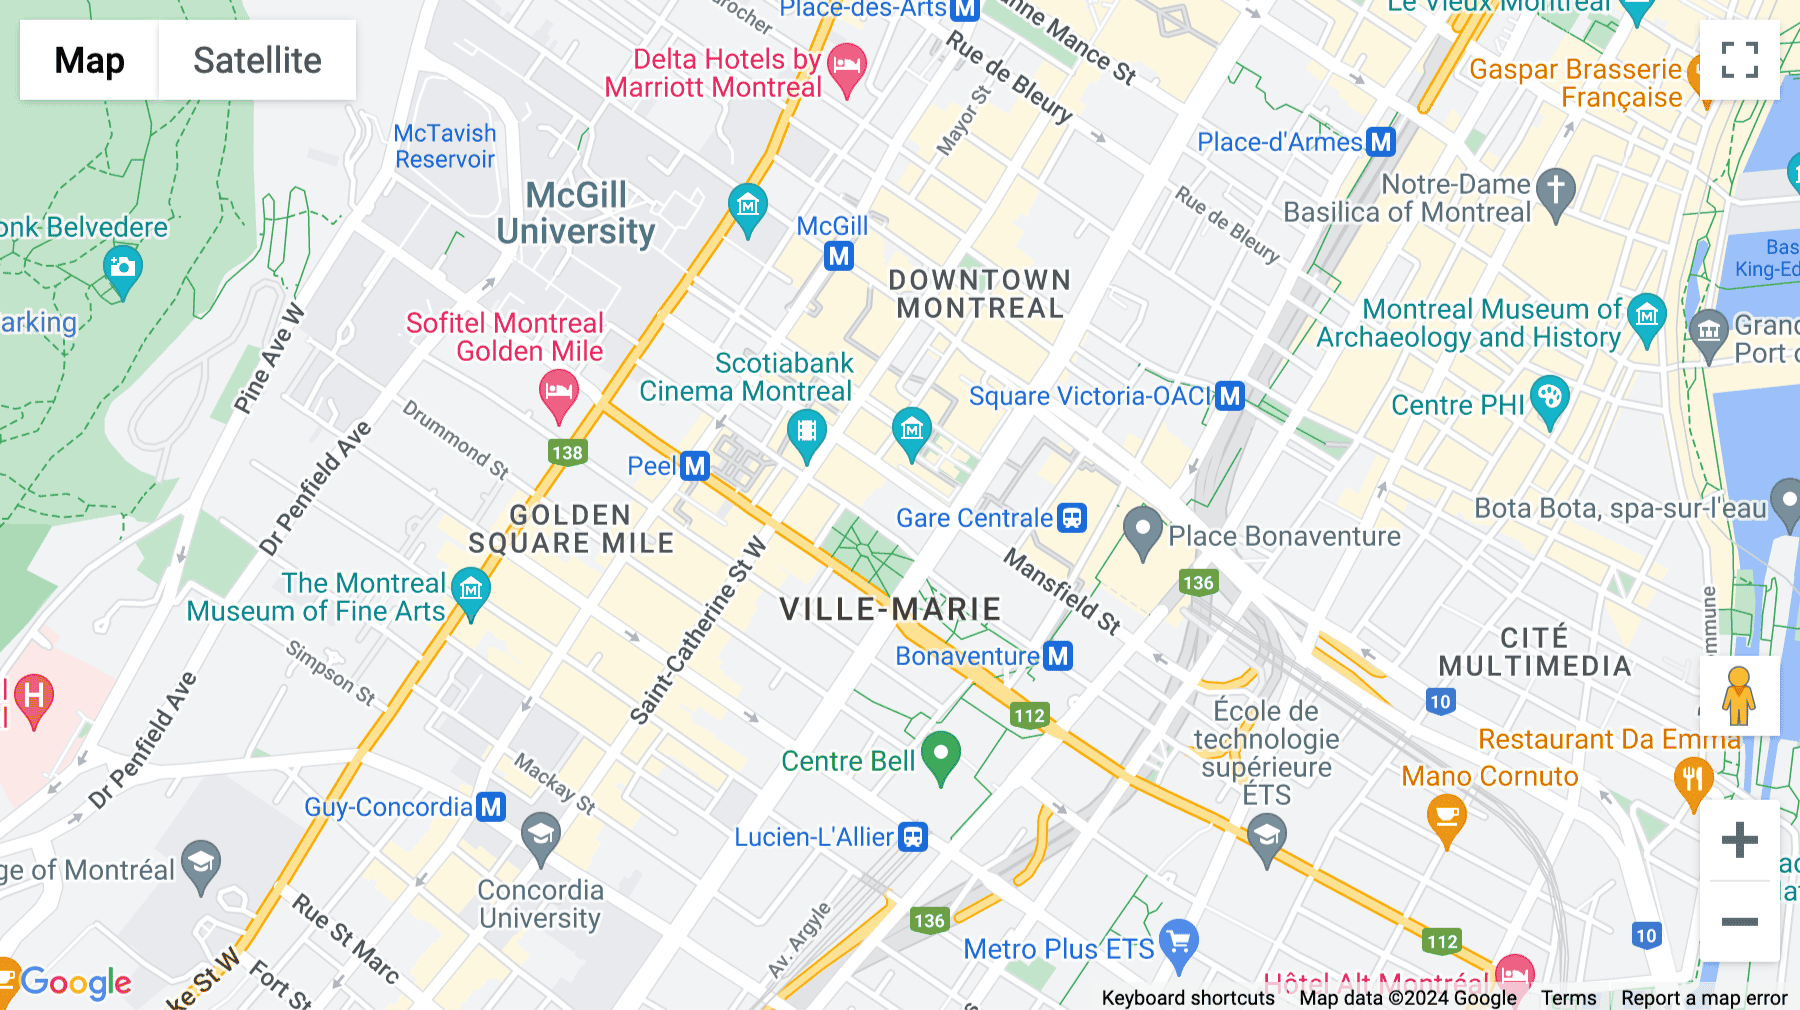 Click for interative map of 1155 Metcalfe Street, Suite 1500, Montreal